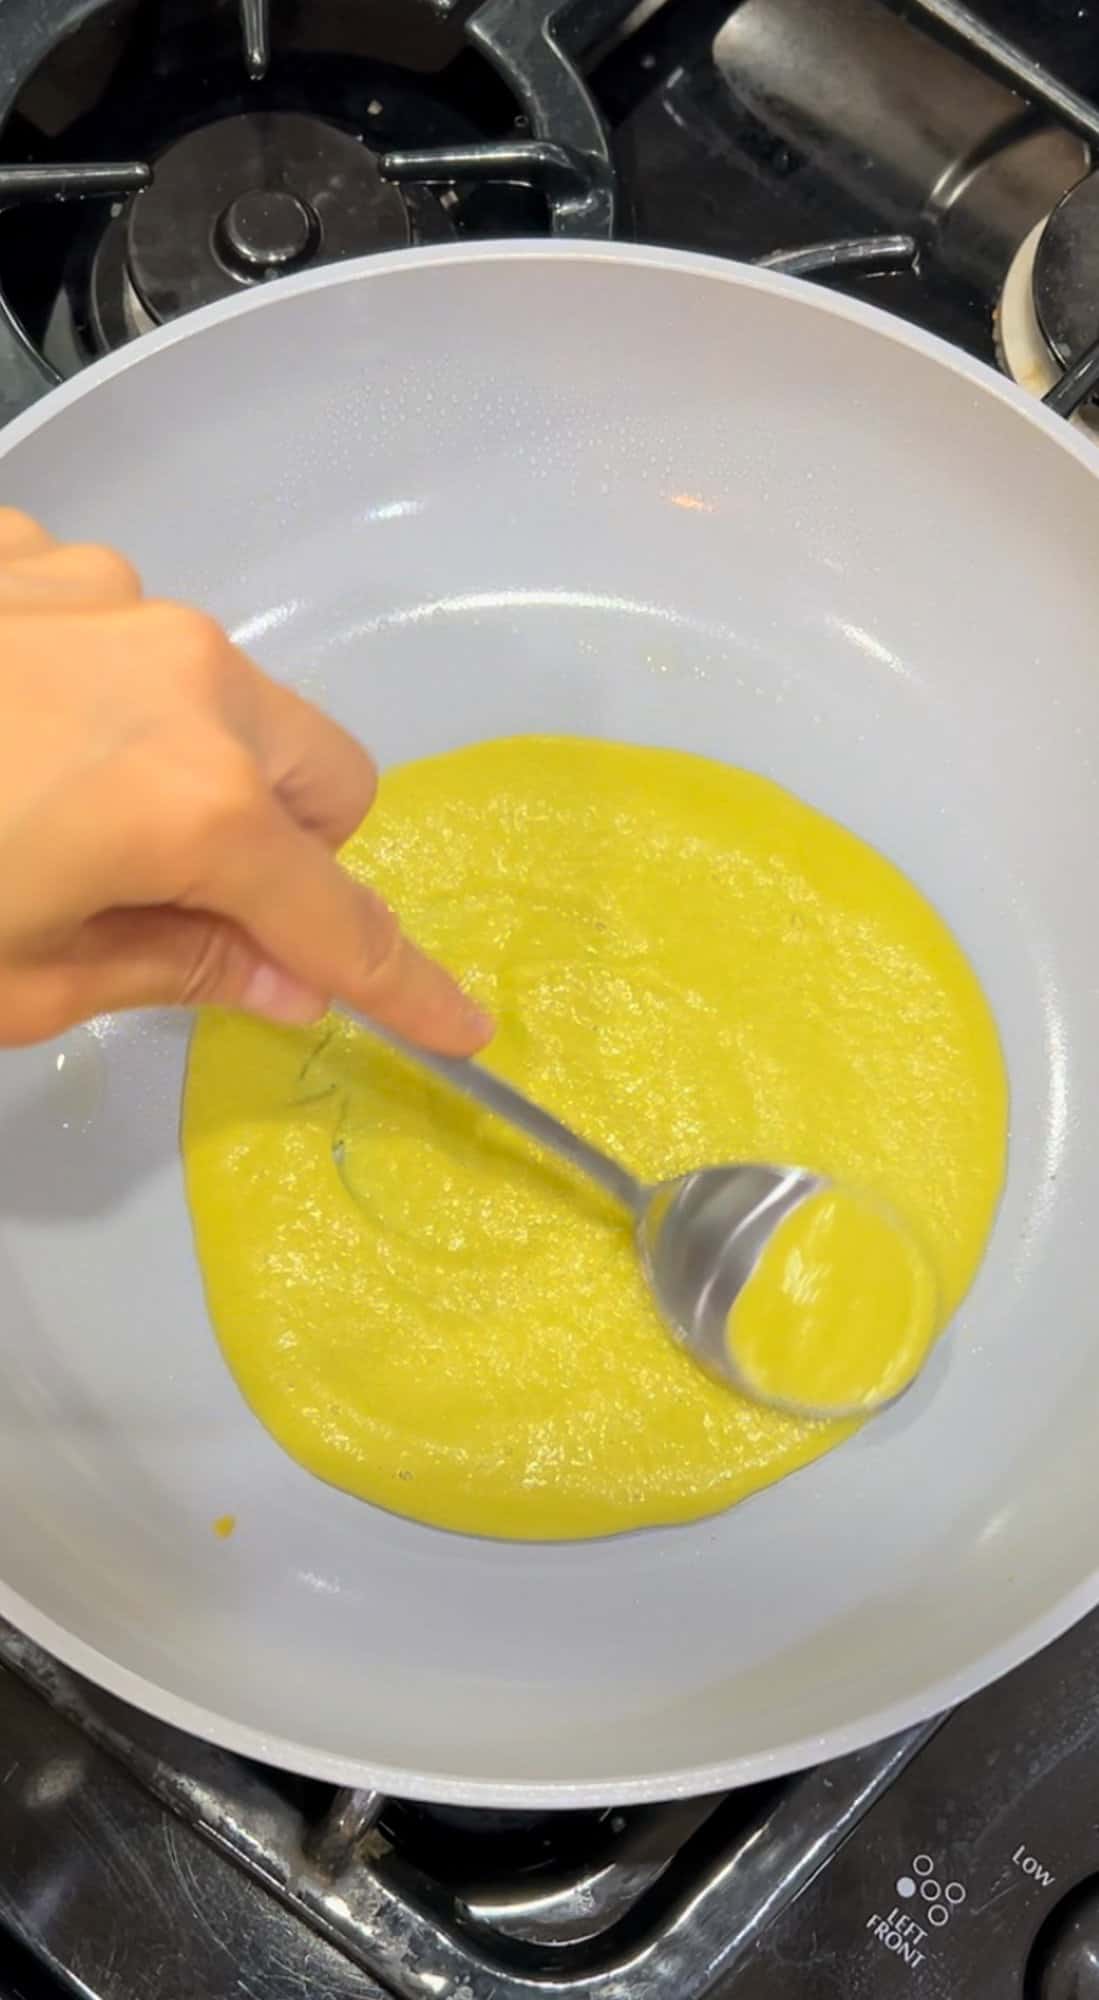 Spreading the wrap batter with the back of a spoon in a pan.